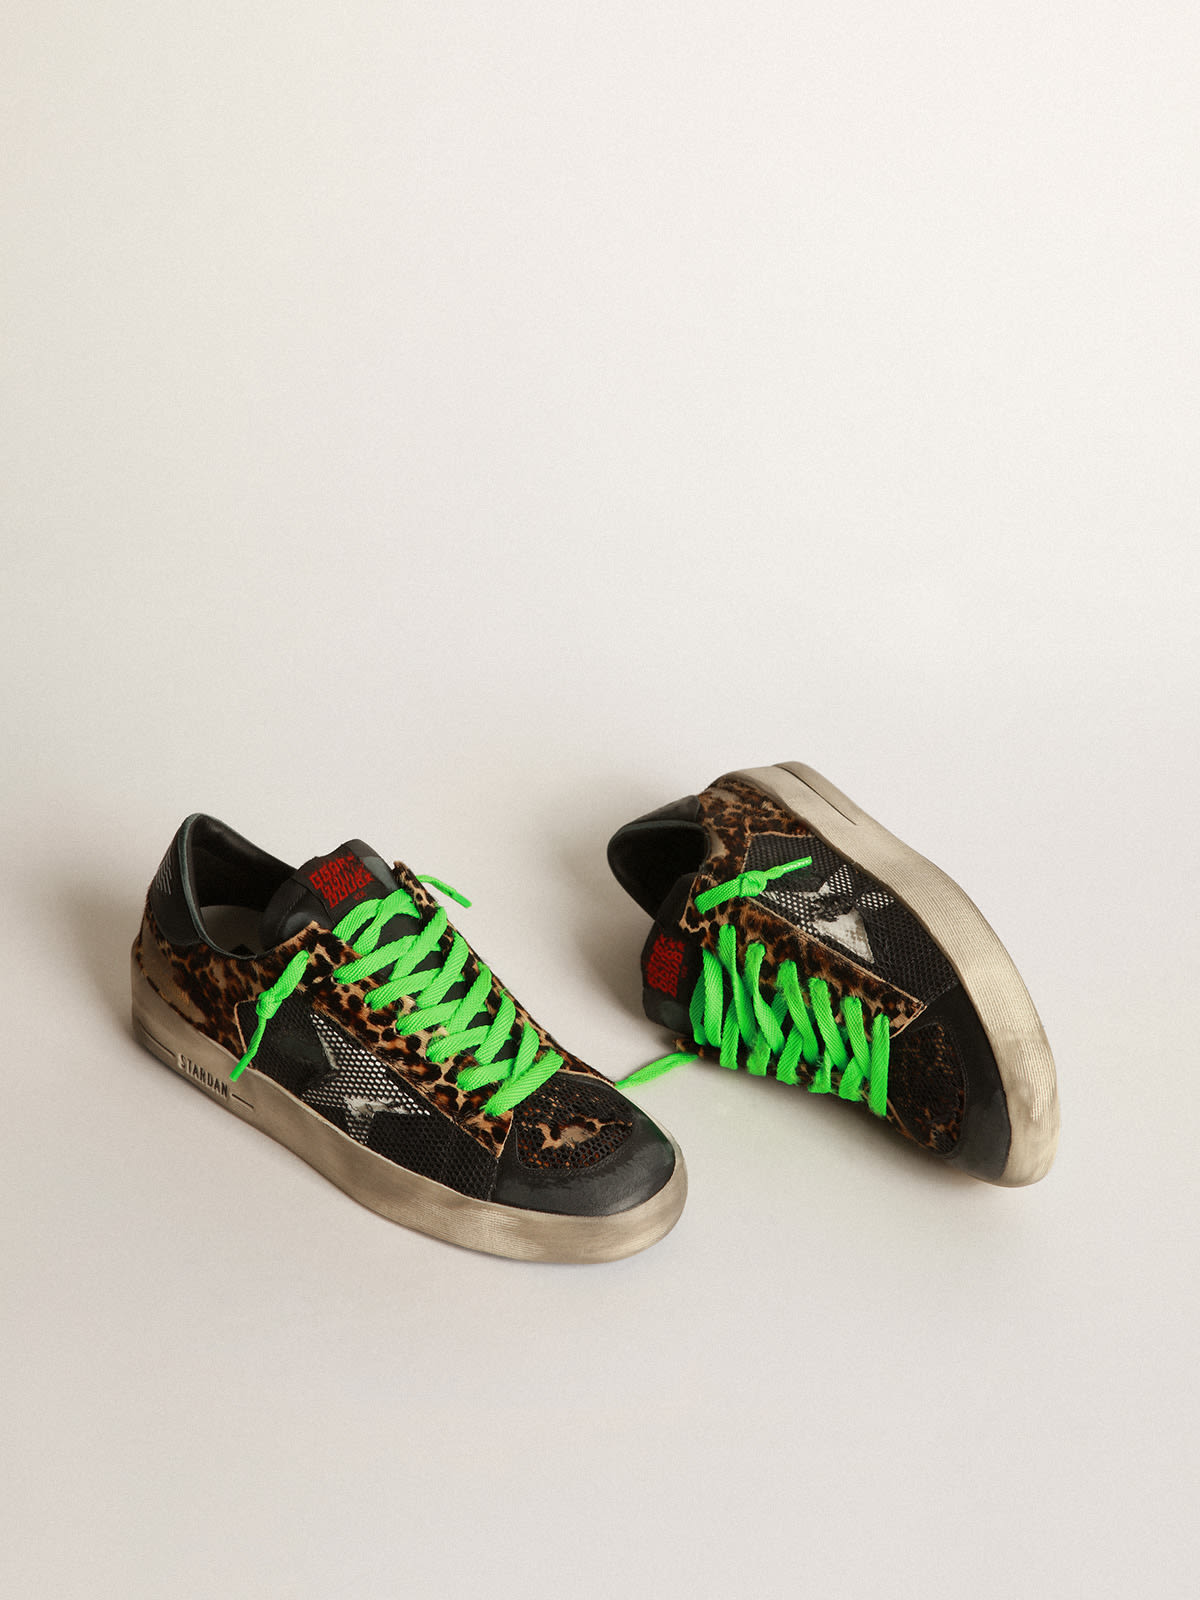 Golden Goose - Leopard print Stardan sneakers with green laces in 